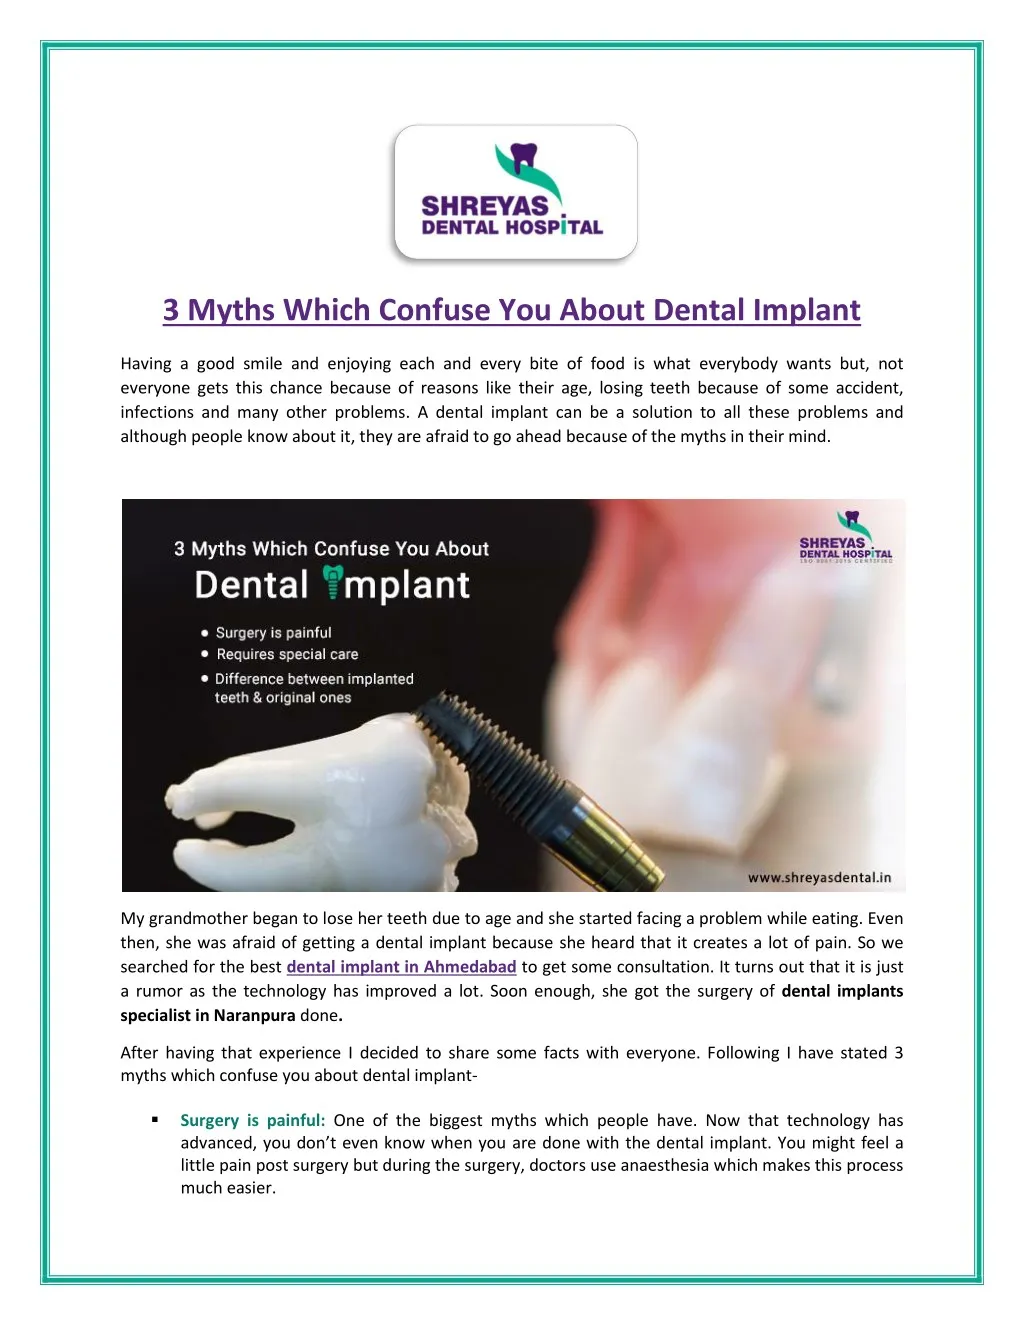 3 myths which confuse you about dental implant